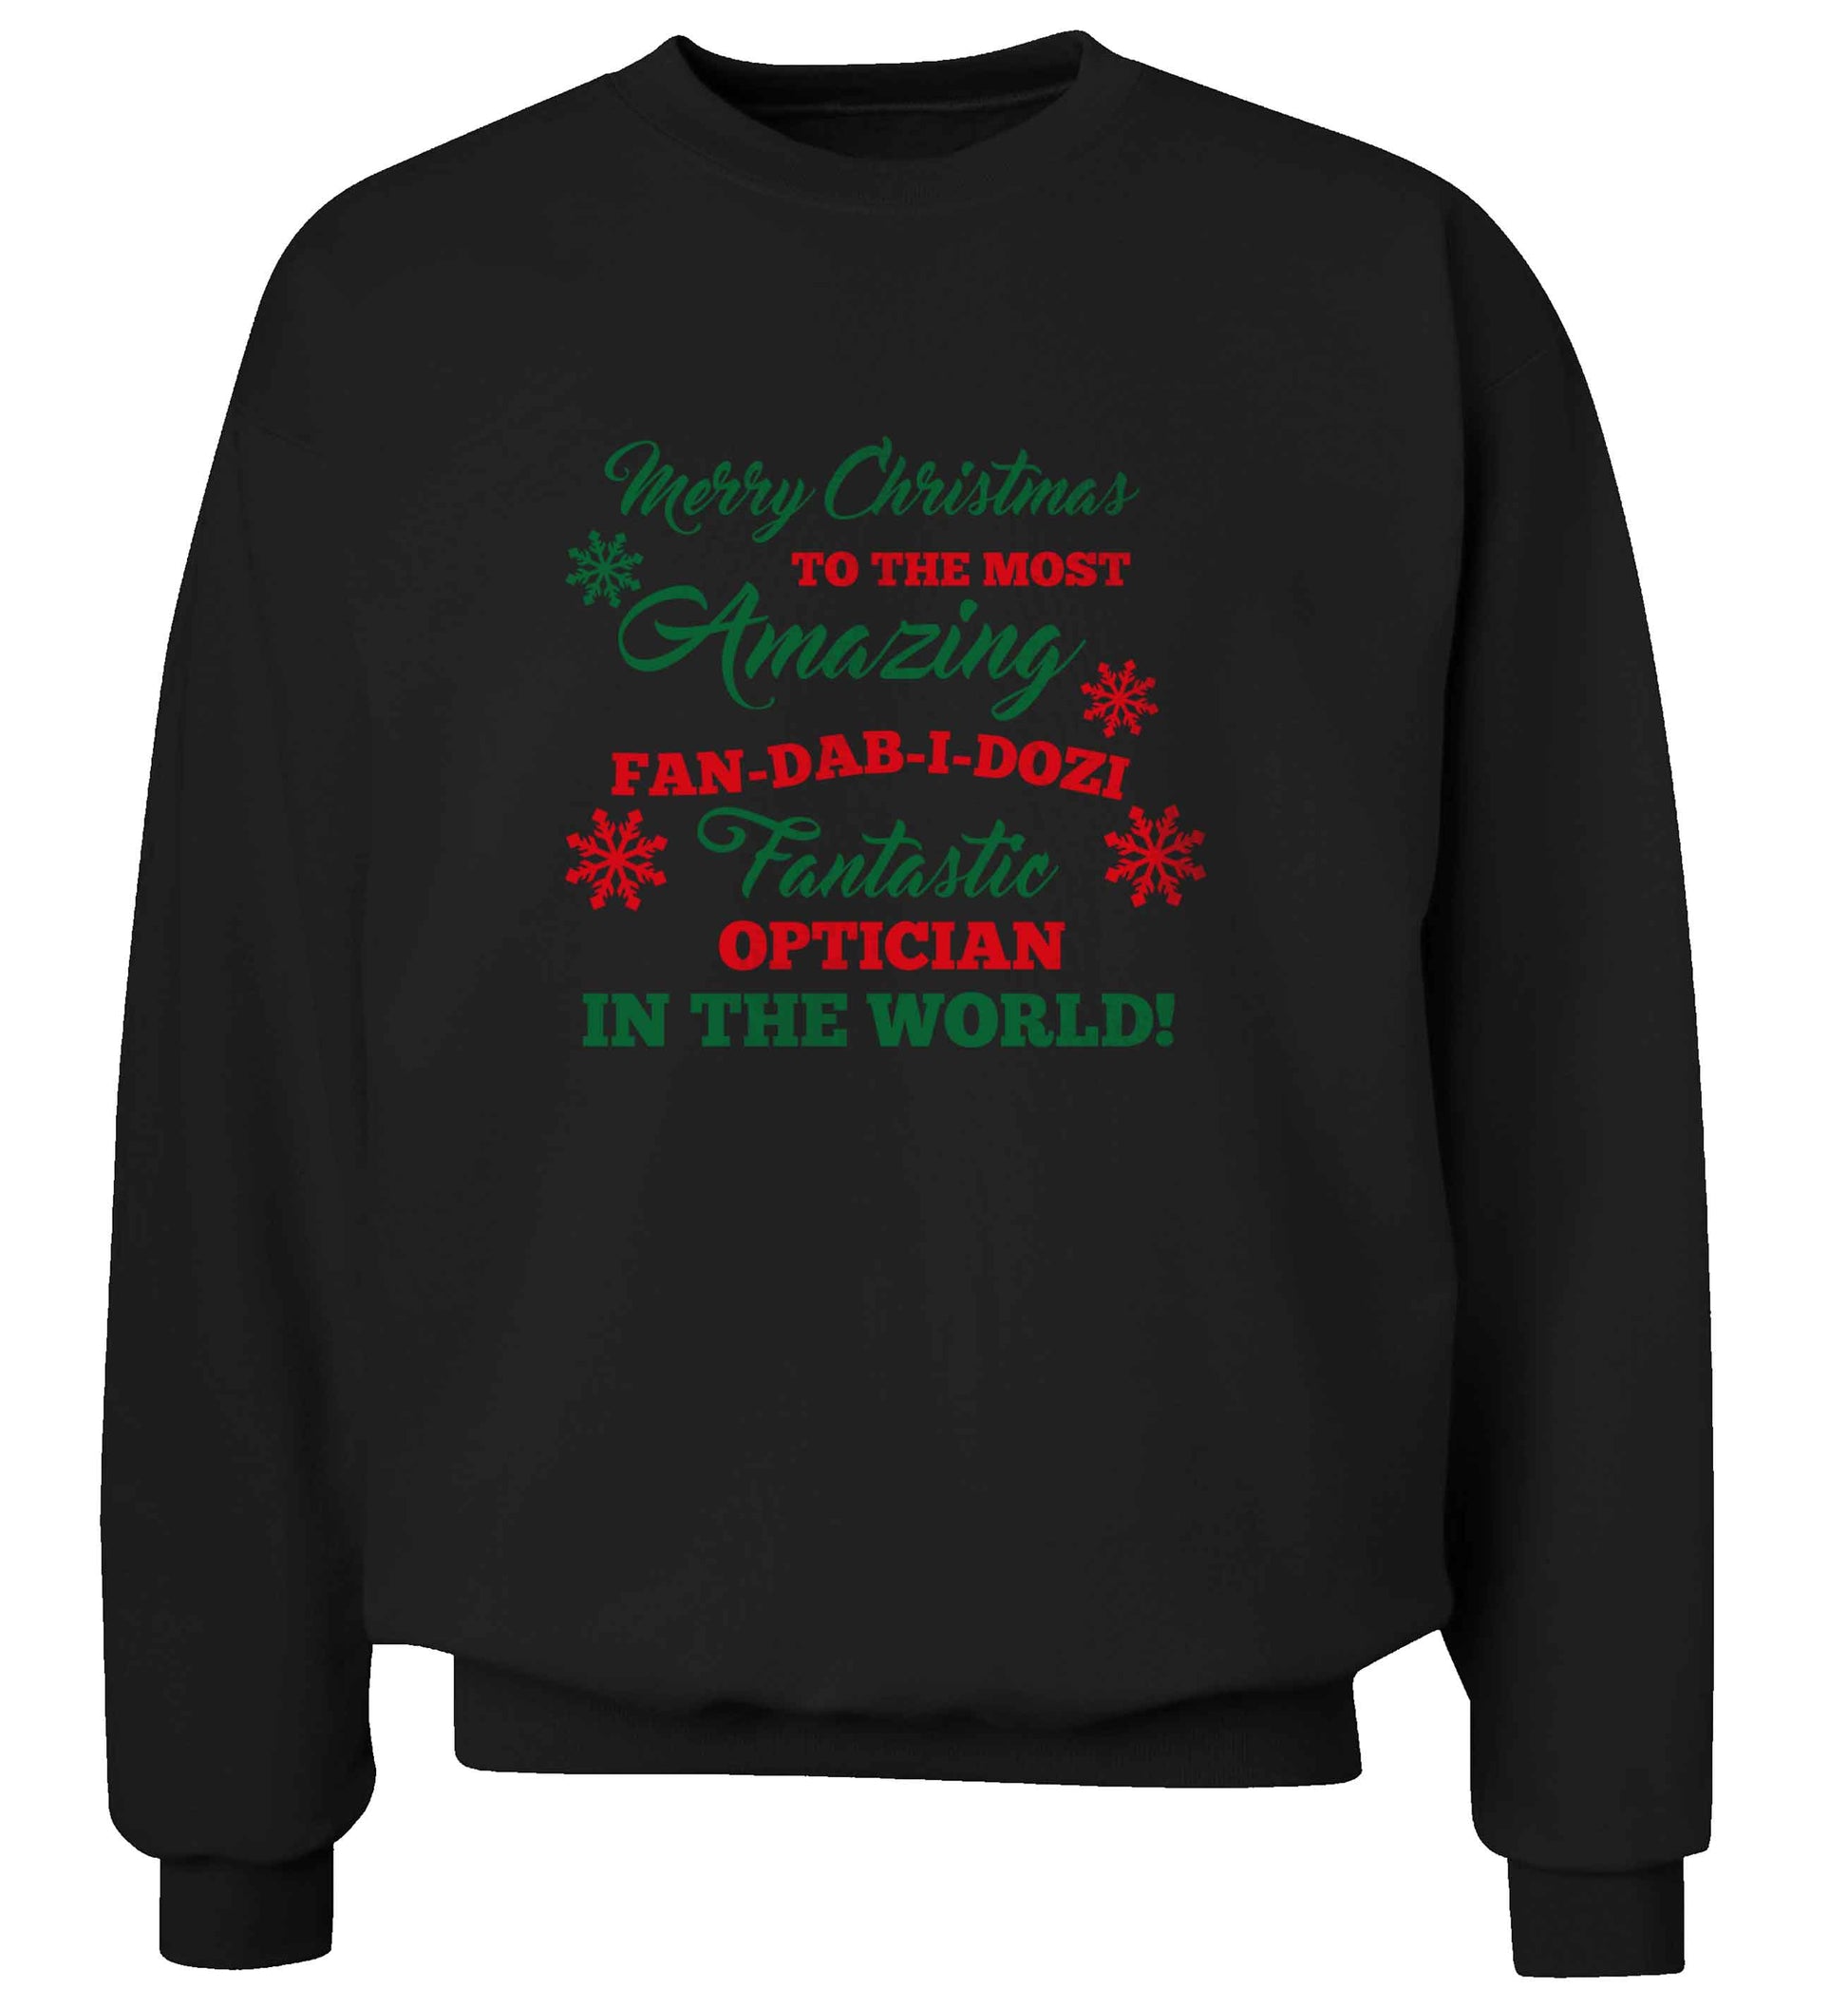 Merry Christmas to the most amazing optician in the world! adult's unisex black sweater 2XL